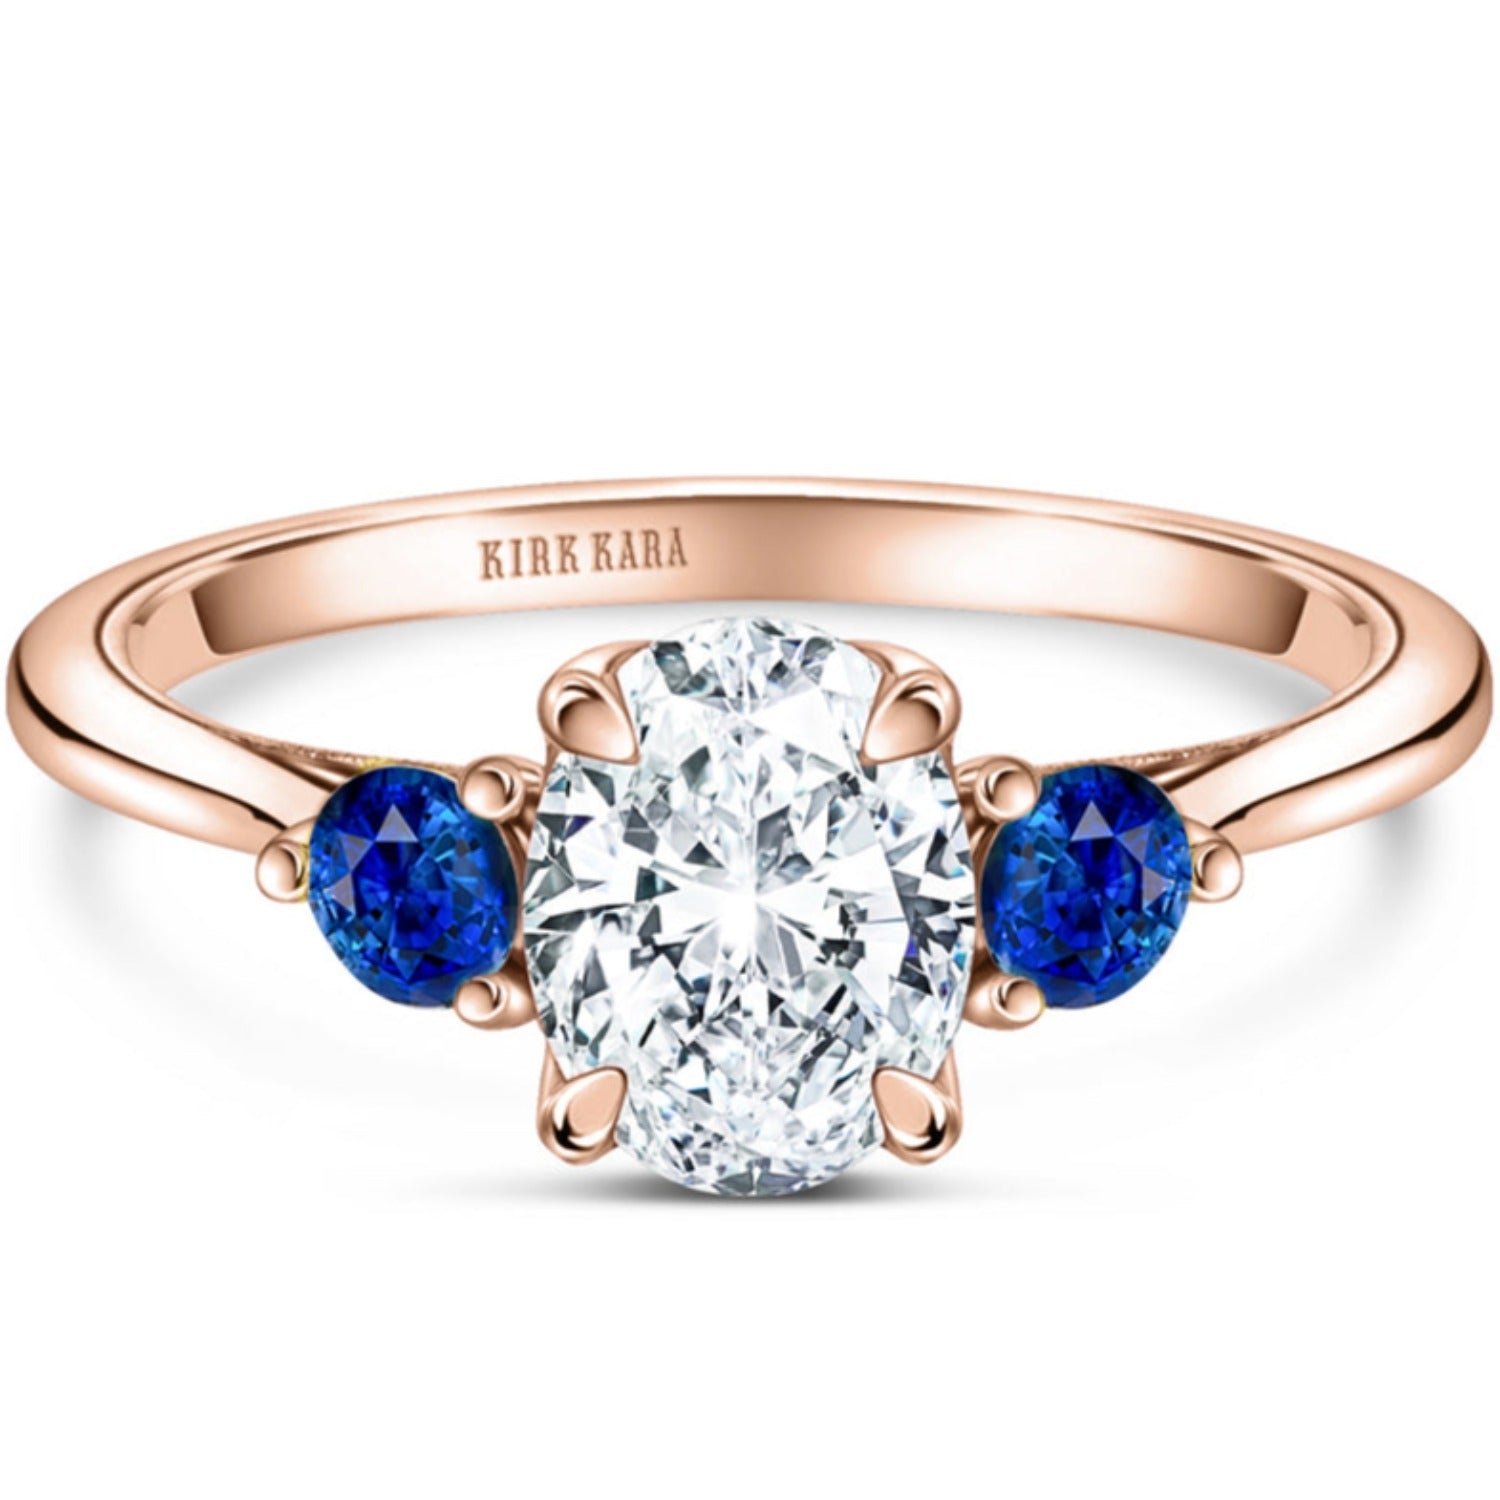 Tiffany Three Stone Engagement Ring with Sapphire Side Stones in Platinum